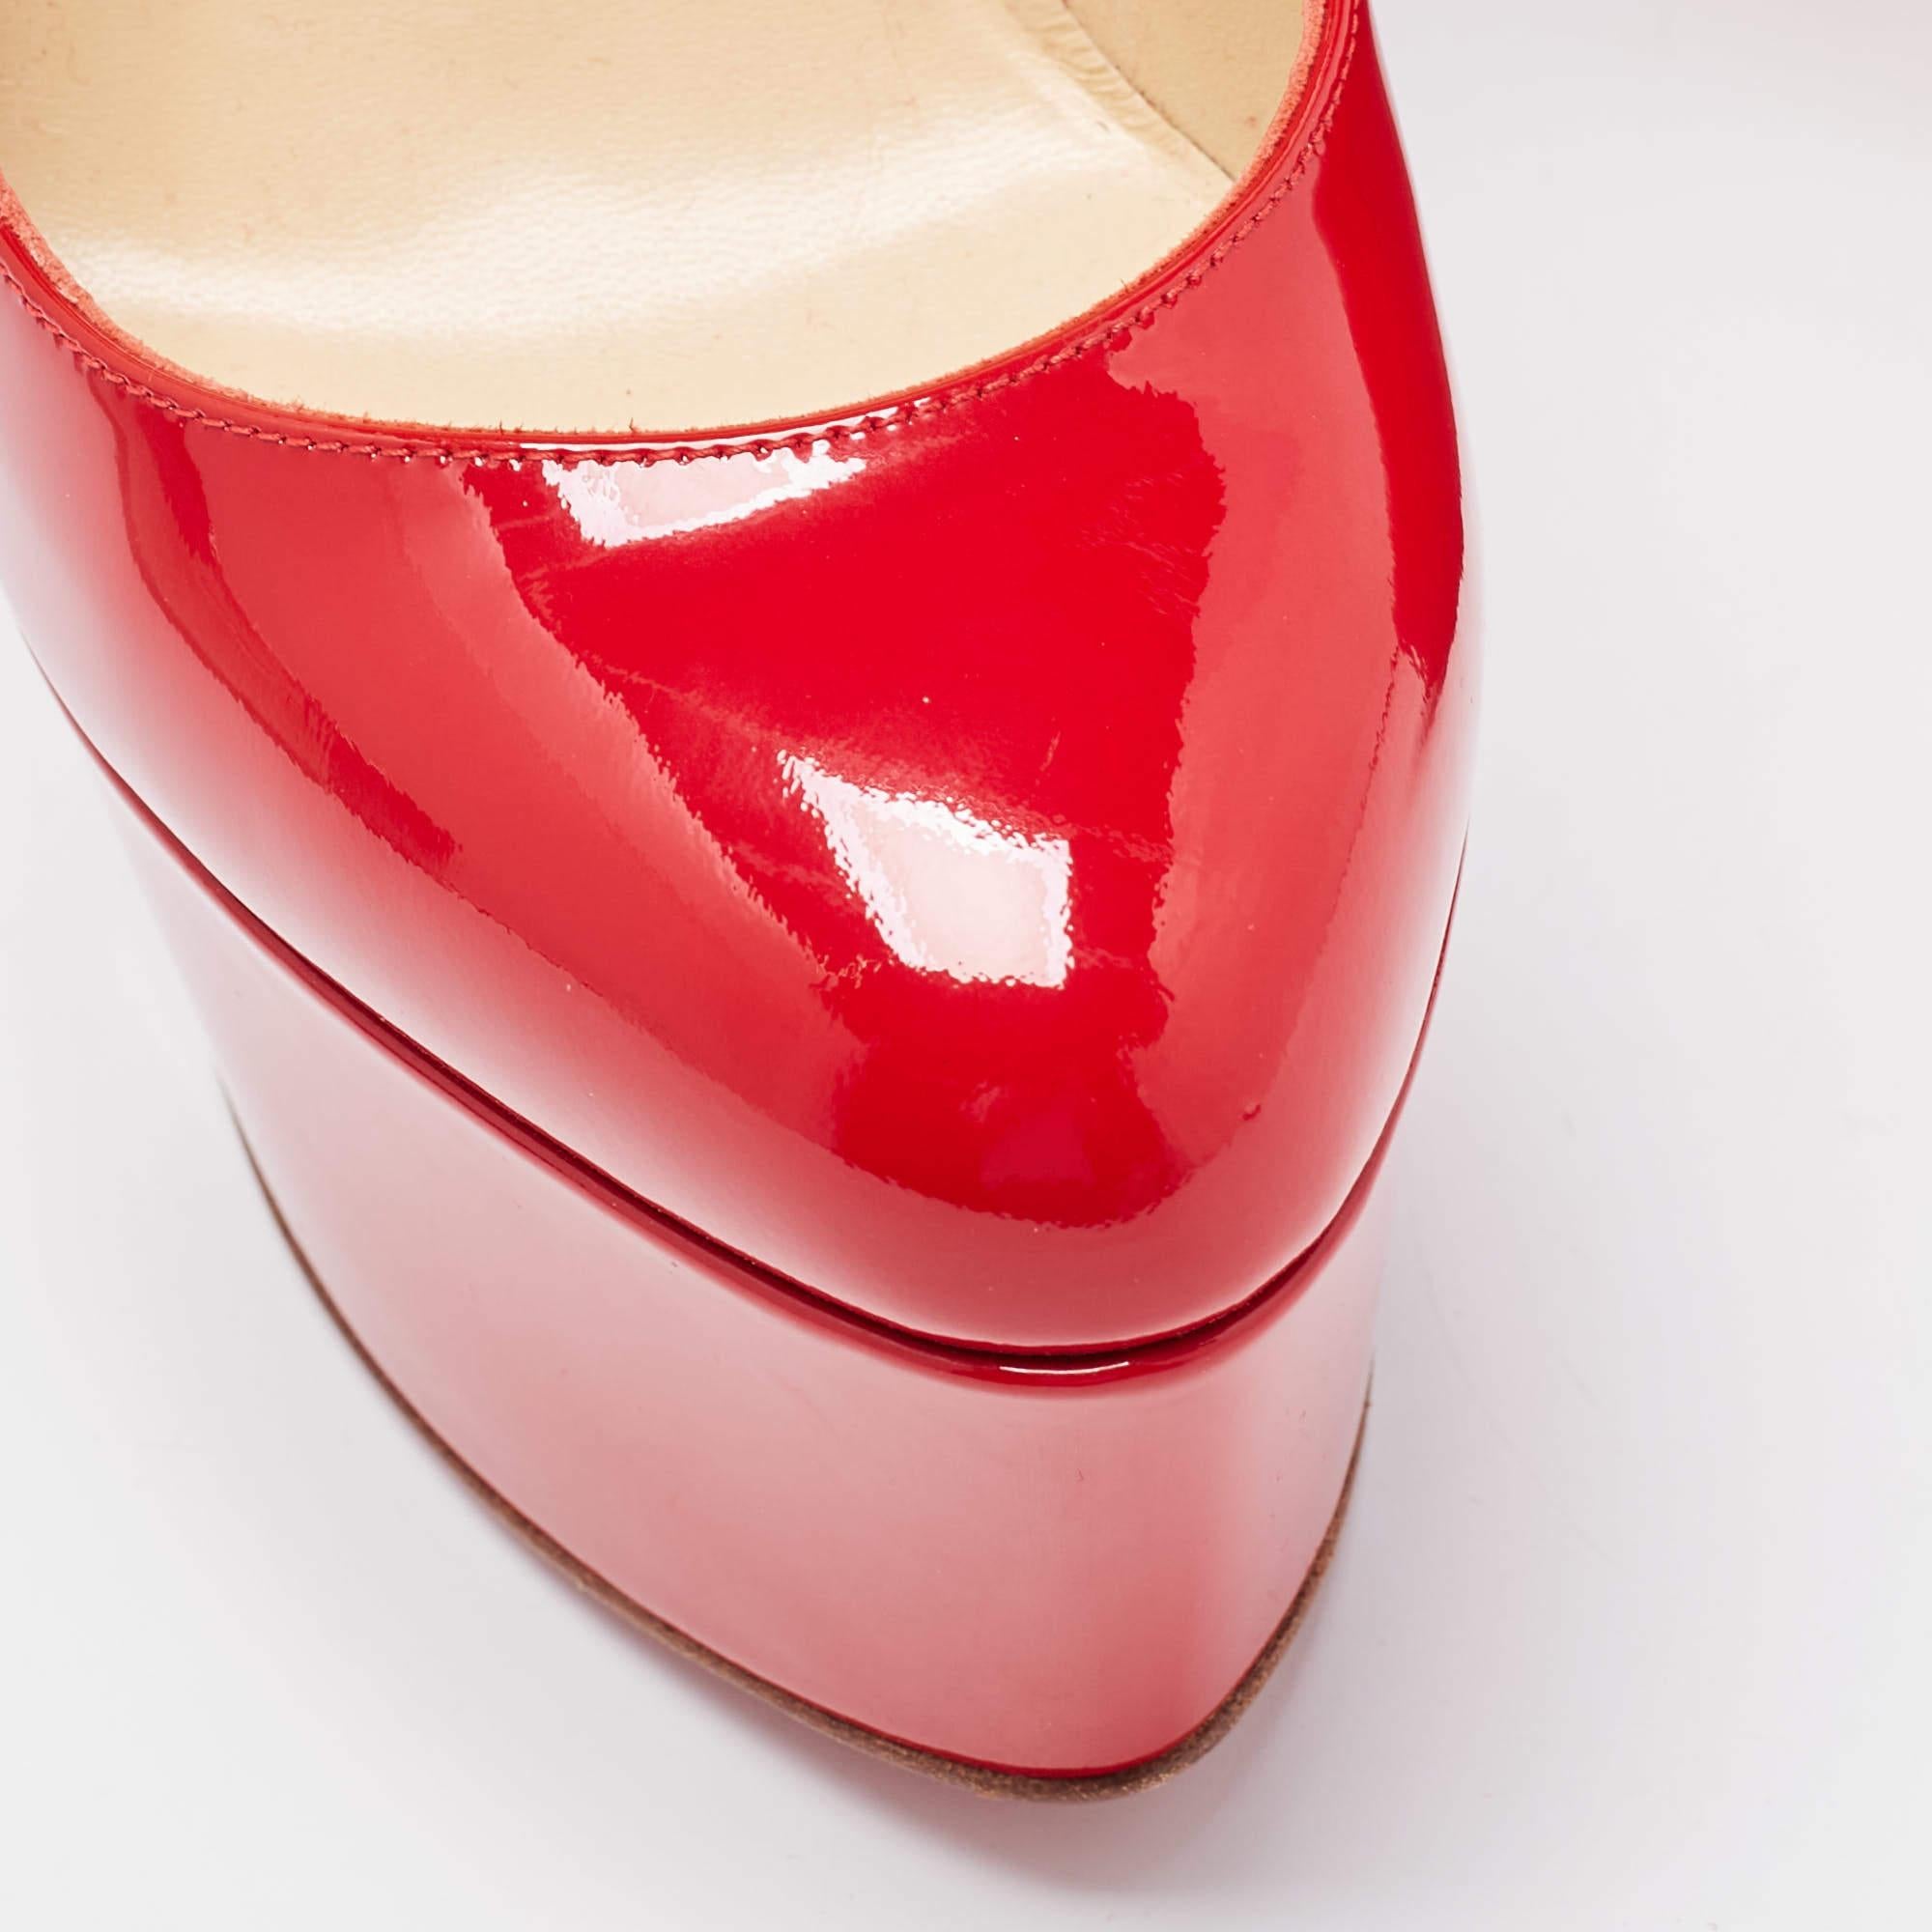 Christian Louboutin Red Patent Leather Victoria Platform Pumps Size 36 3